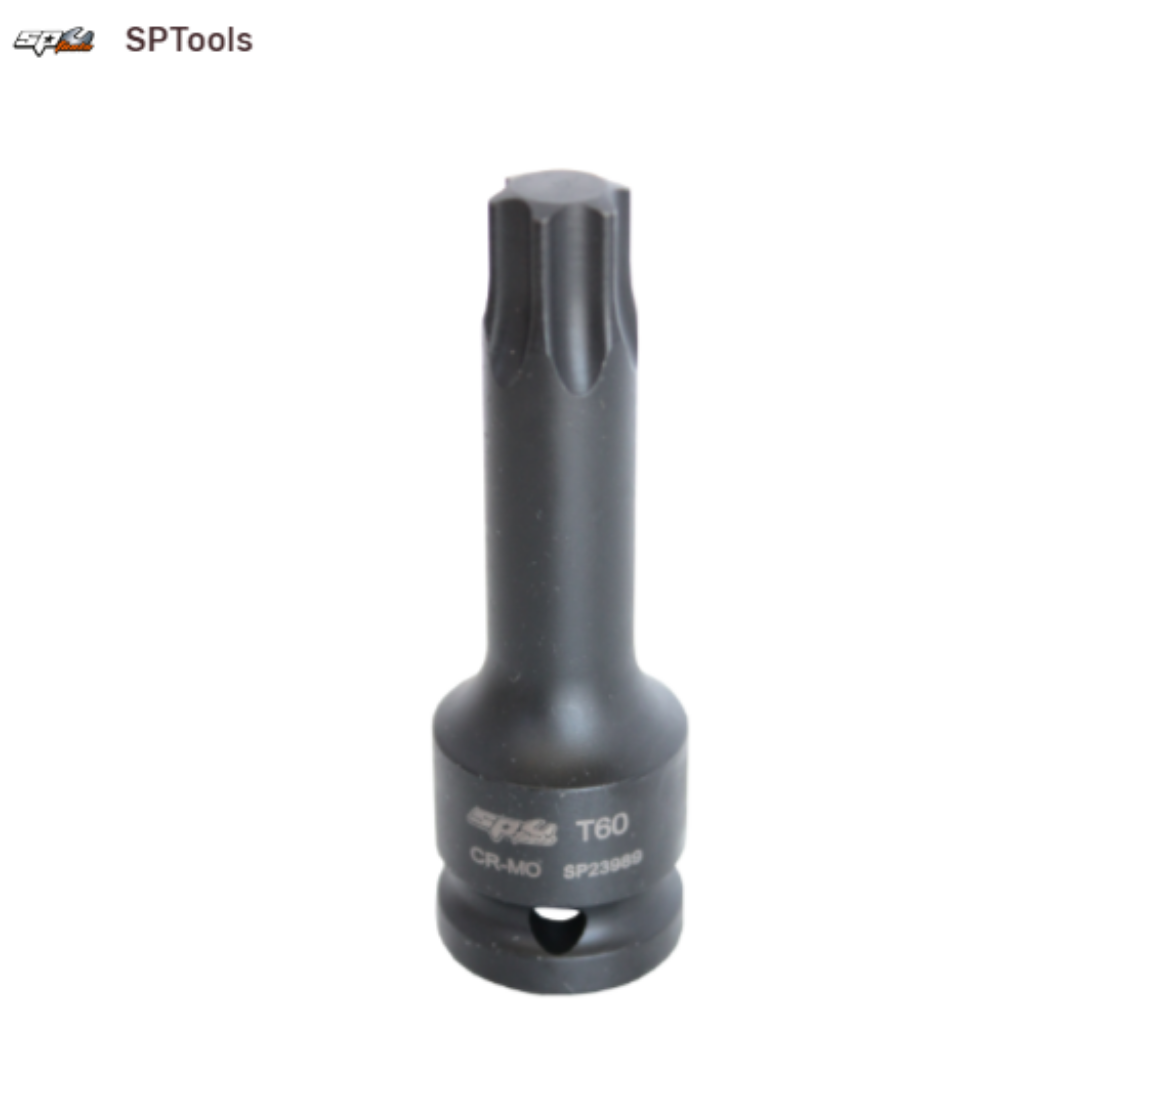 Picture of SOCKET IMPACT 1/2"DR TORX T25 SP TOOLS